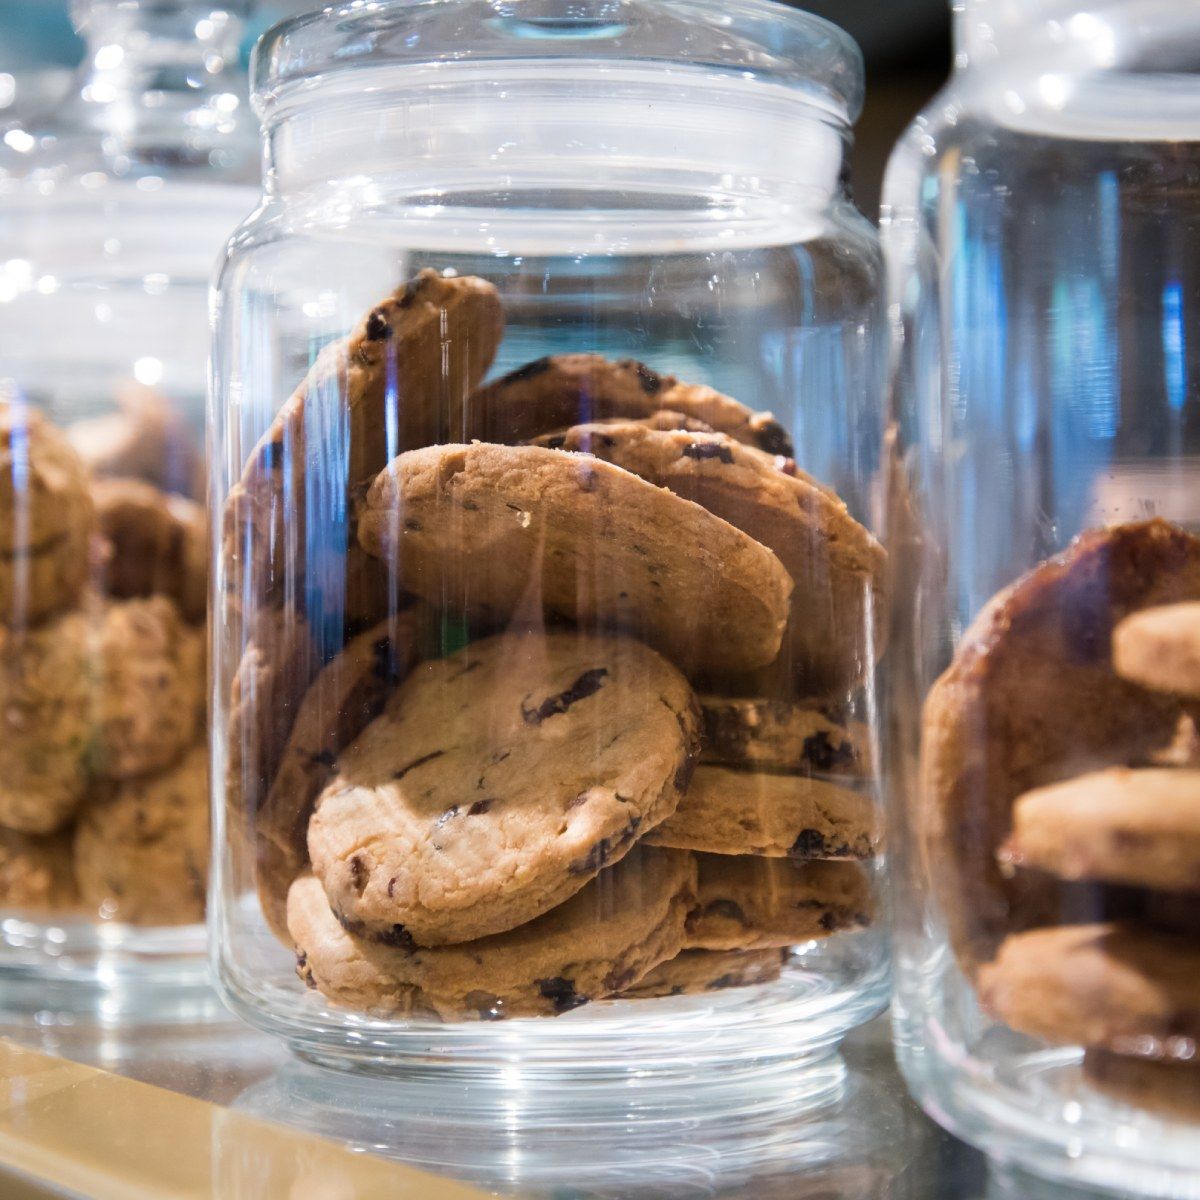 A close up of several chocolate chip cookies in a clear glass jar.